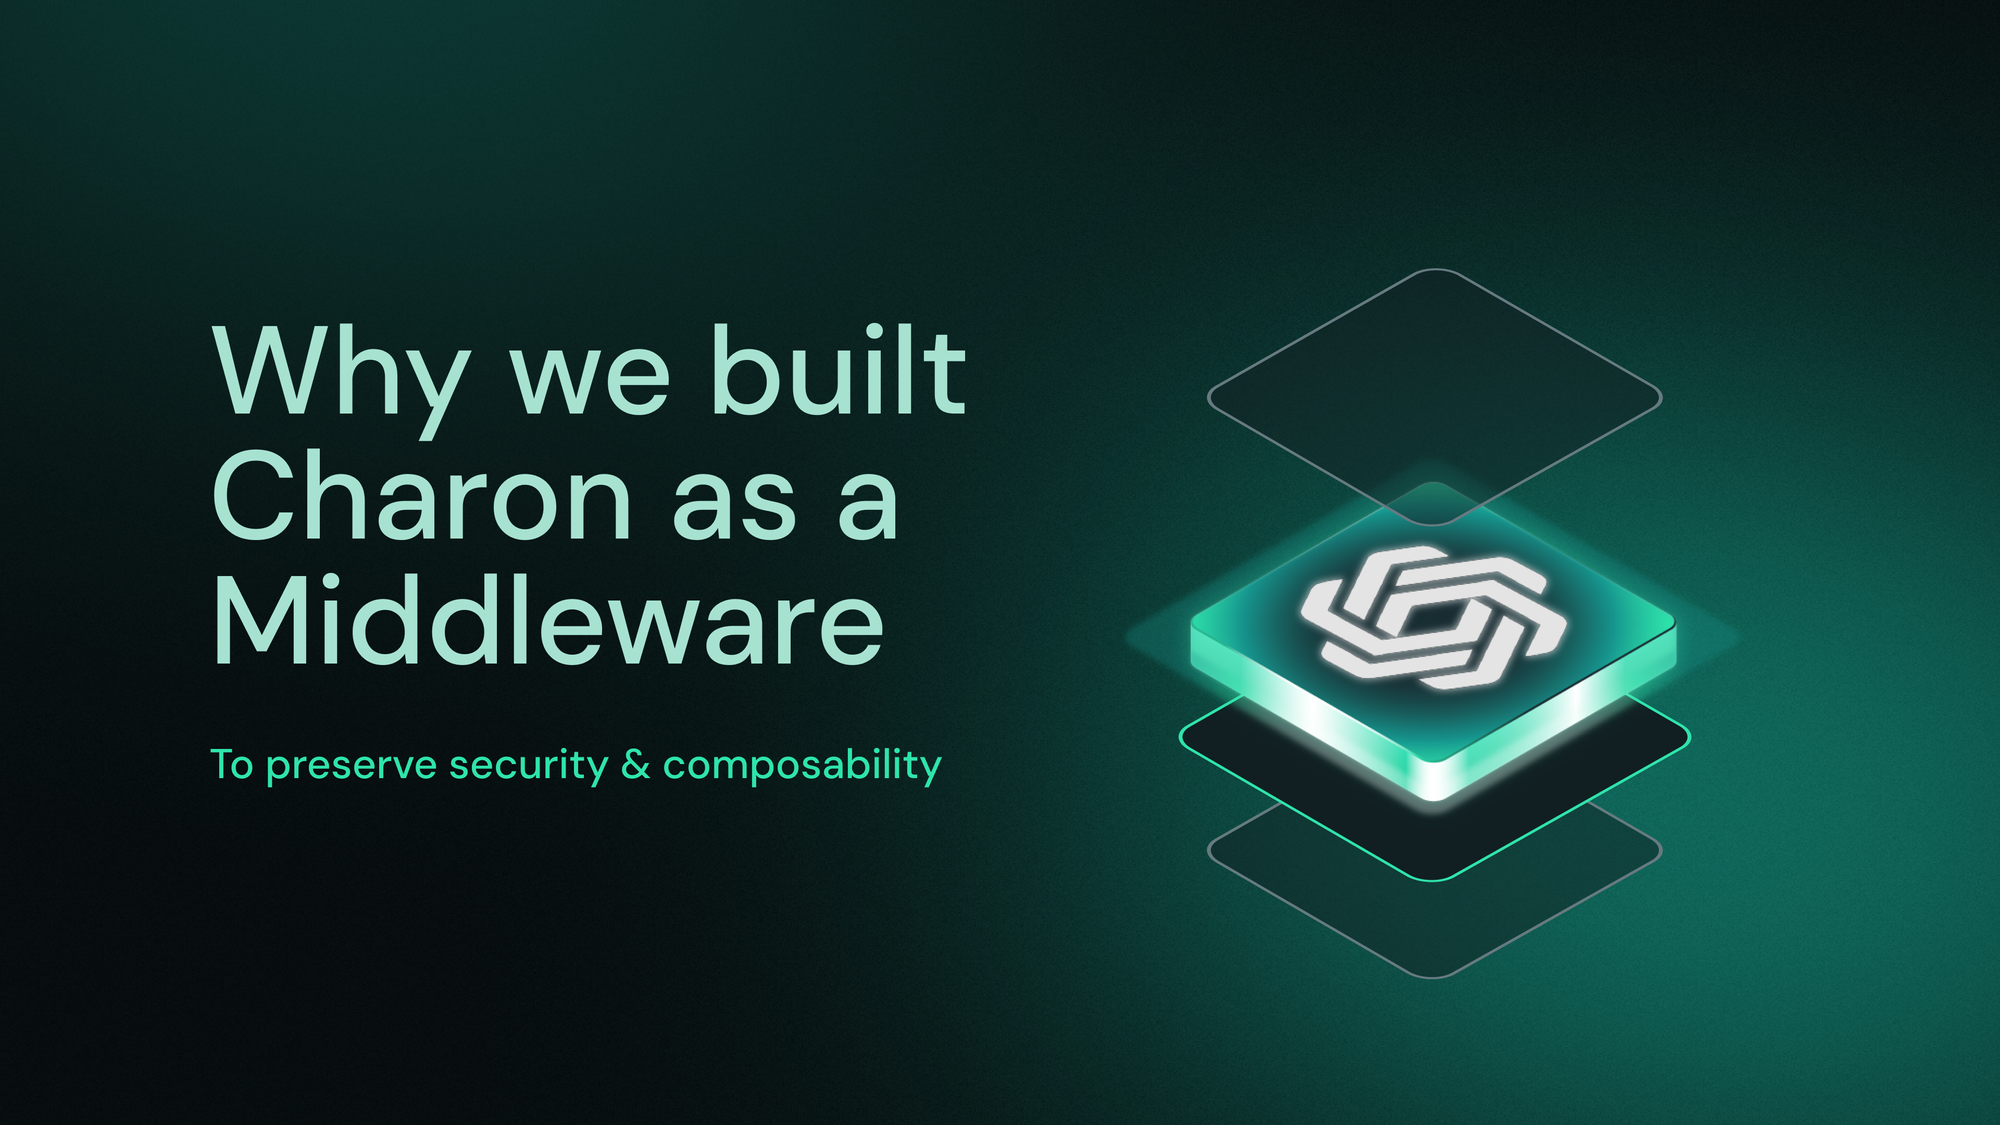 Why We Built Charon as a Middleware